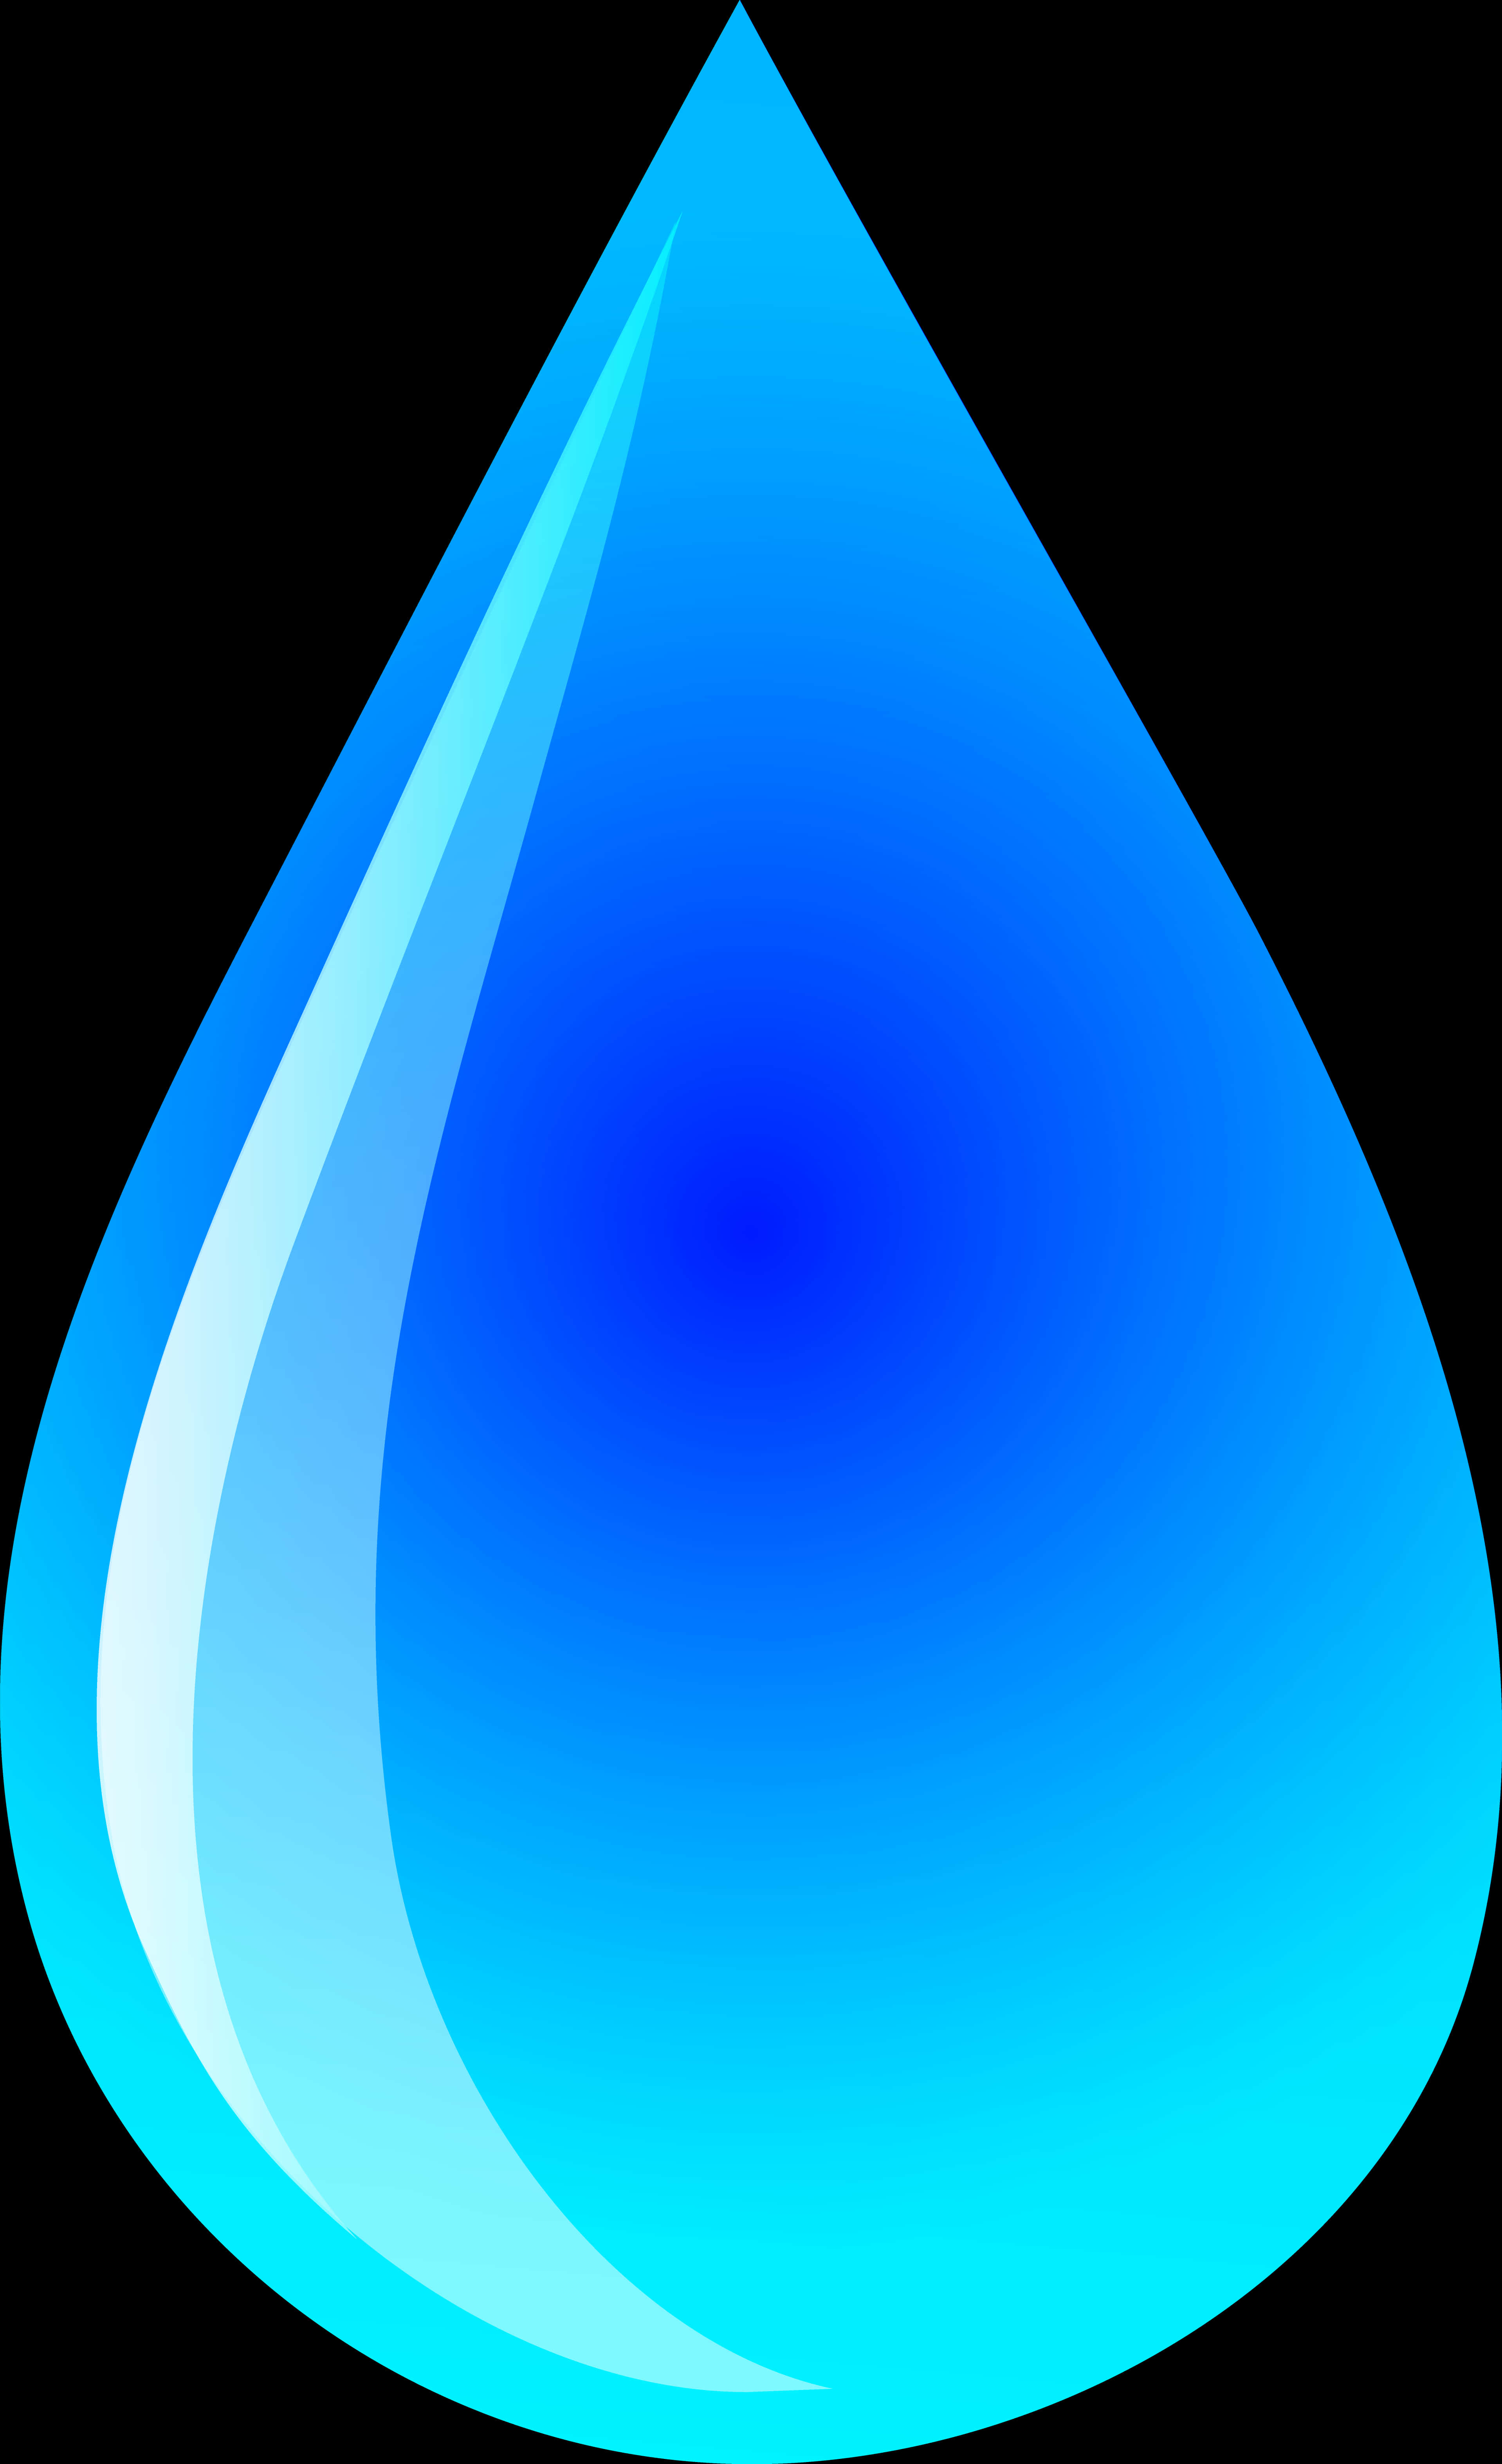 A Blue Water Droplet On A Black Background